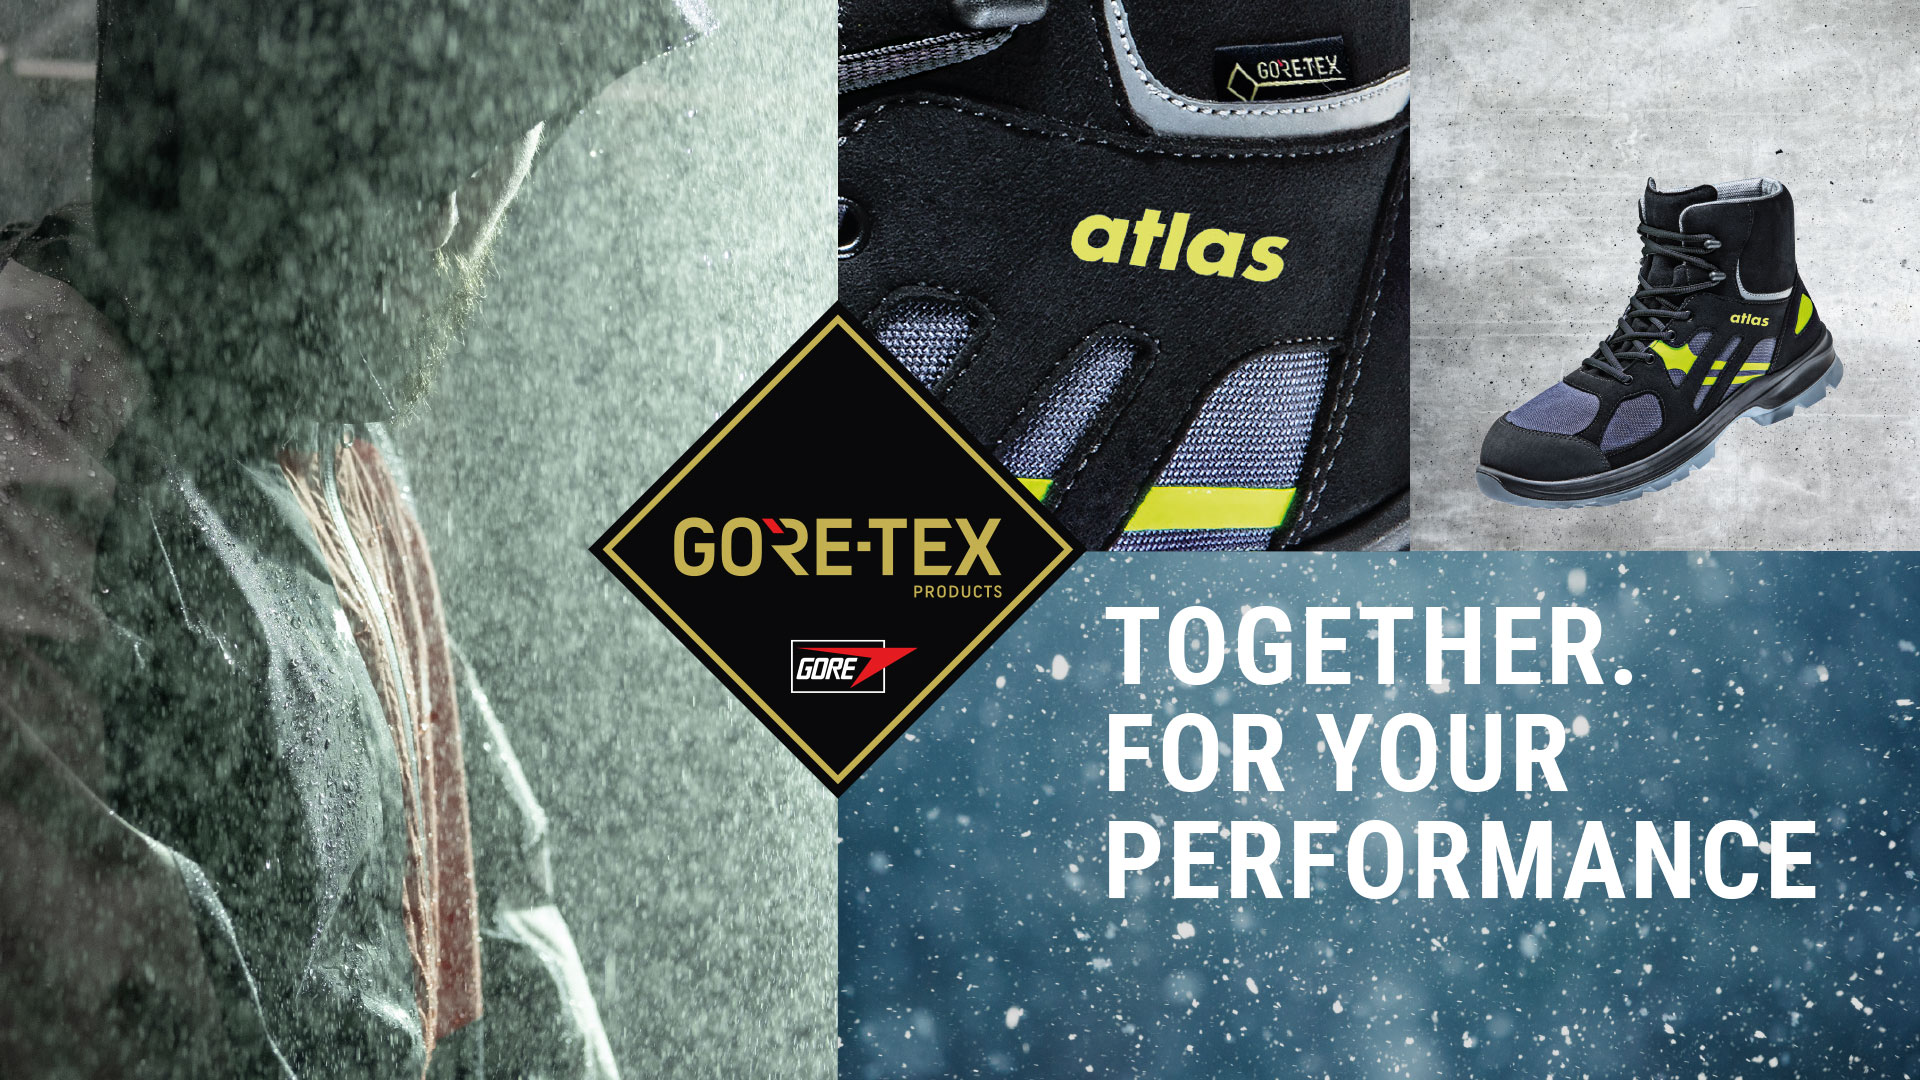 Gore-Tex functional lining